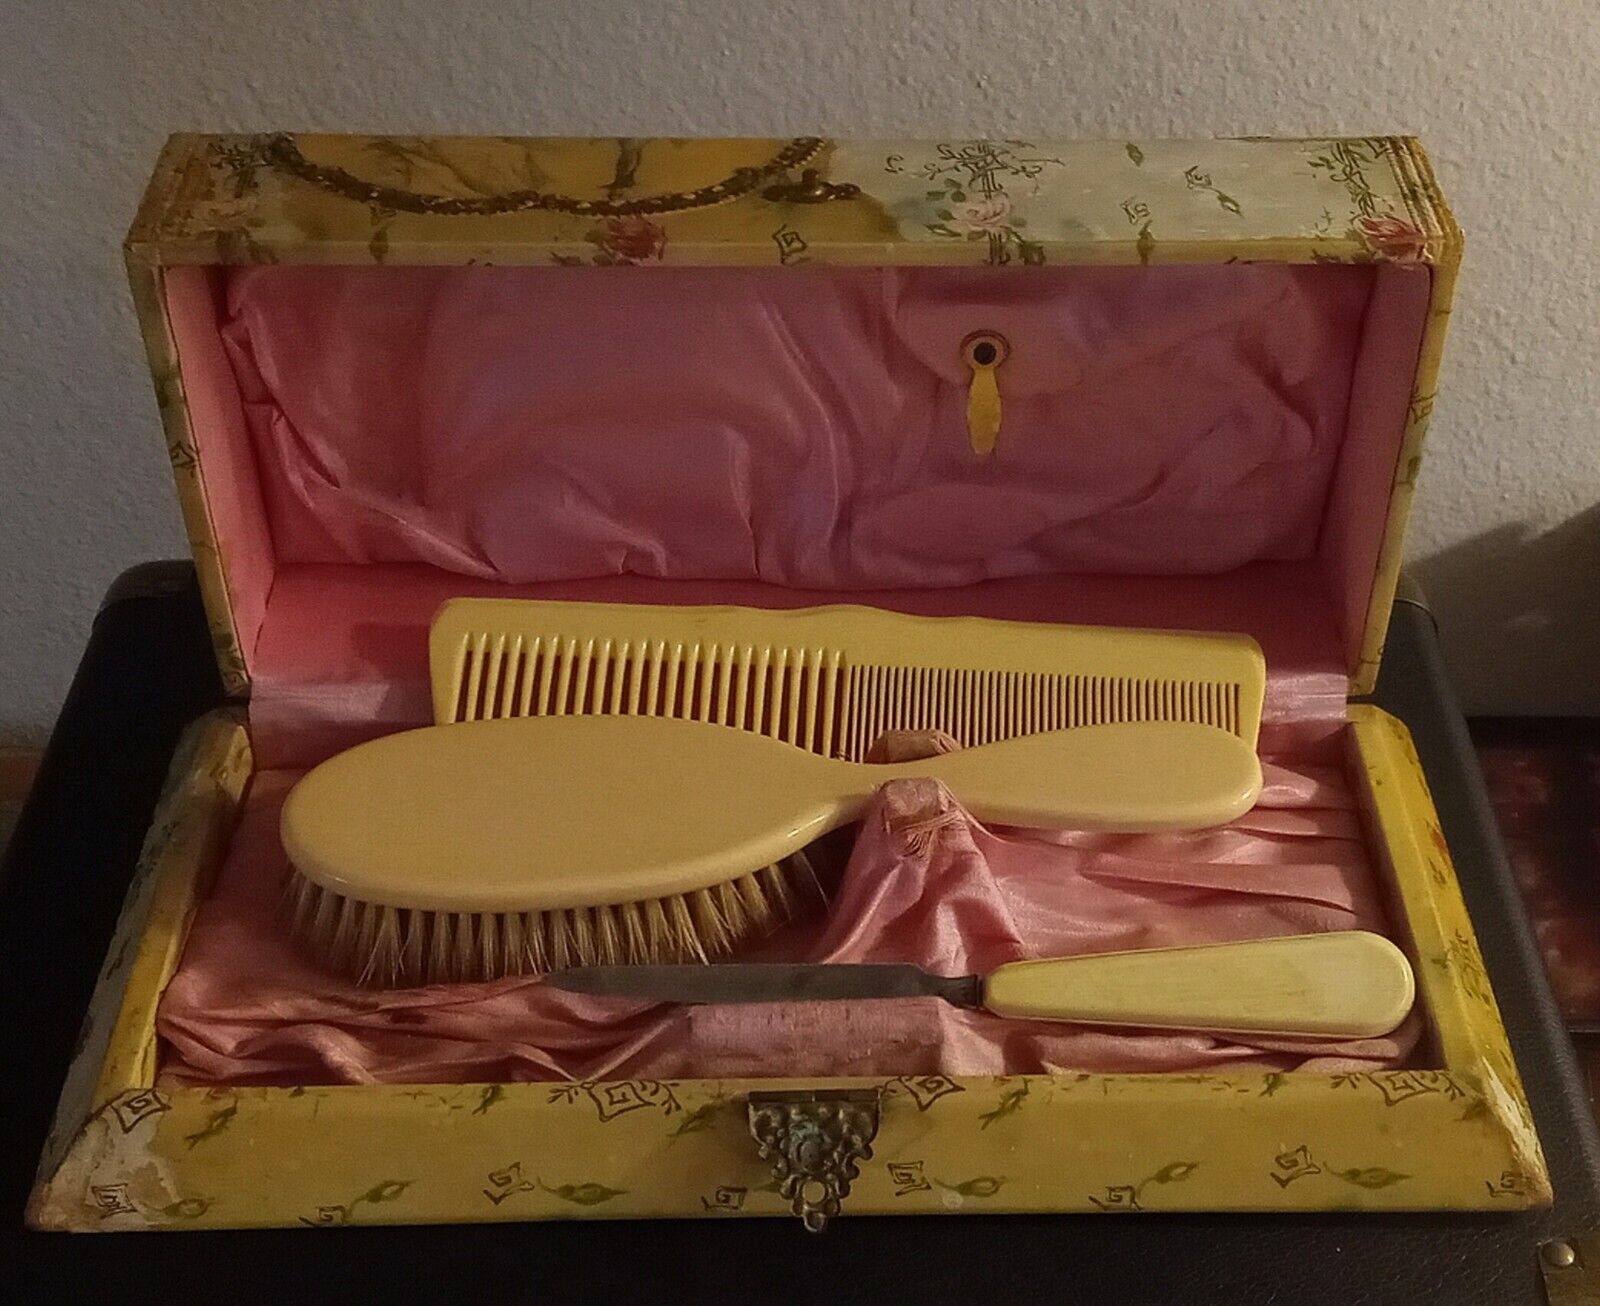 Antique Edwardian Celluloid French Ivory Hair Brush, Comb, Nail File Set w/Box